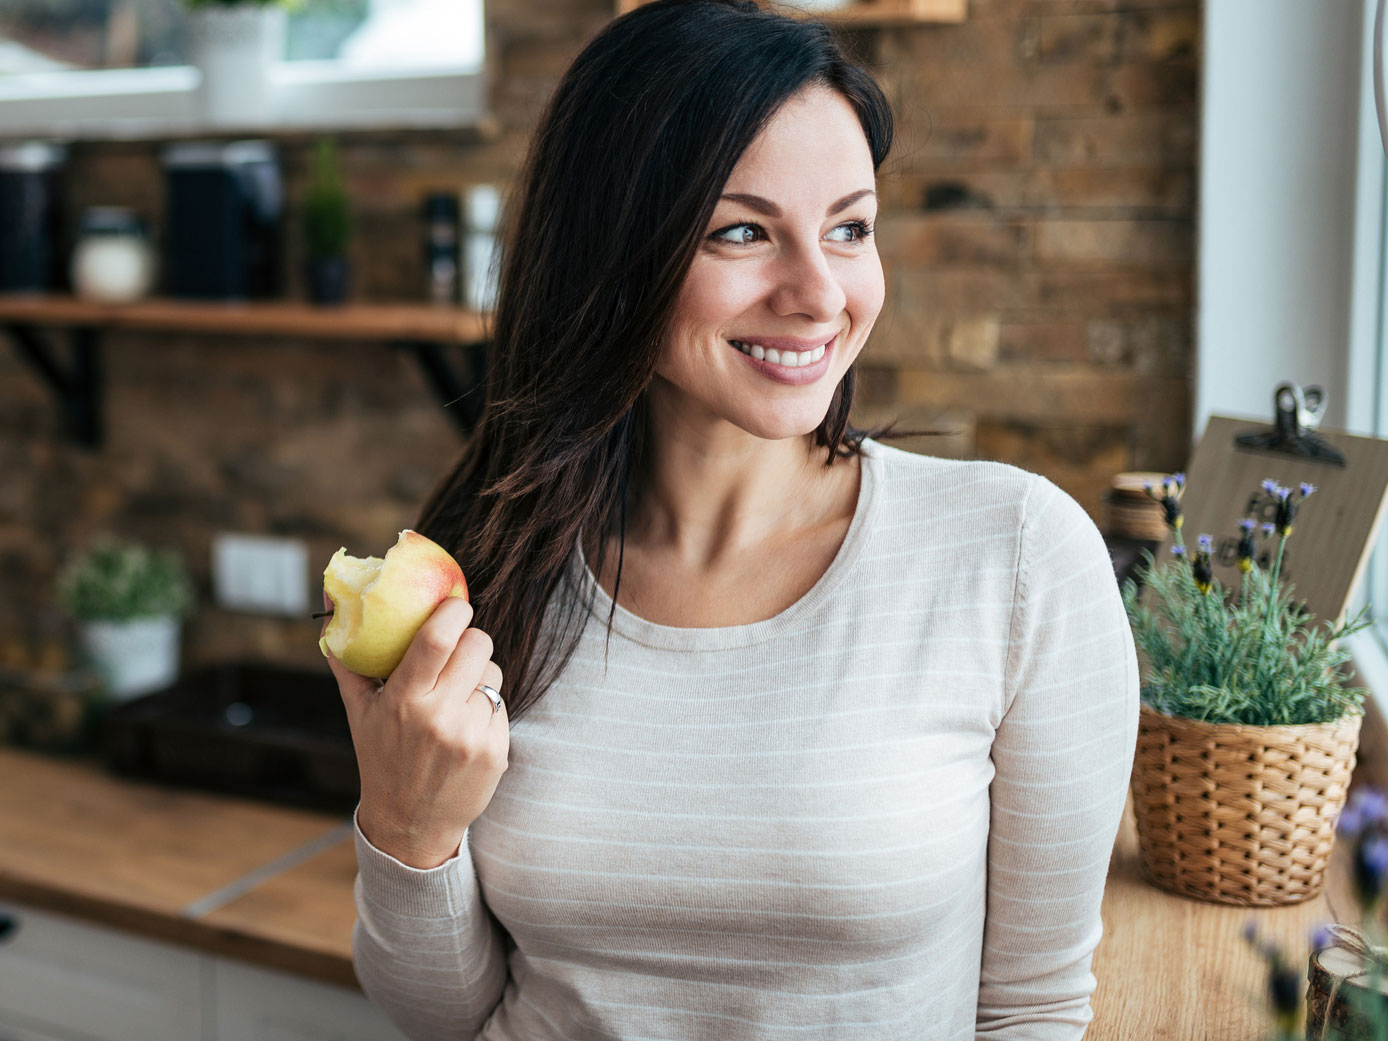 4 reasons to start eating apples the RIGHT way